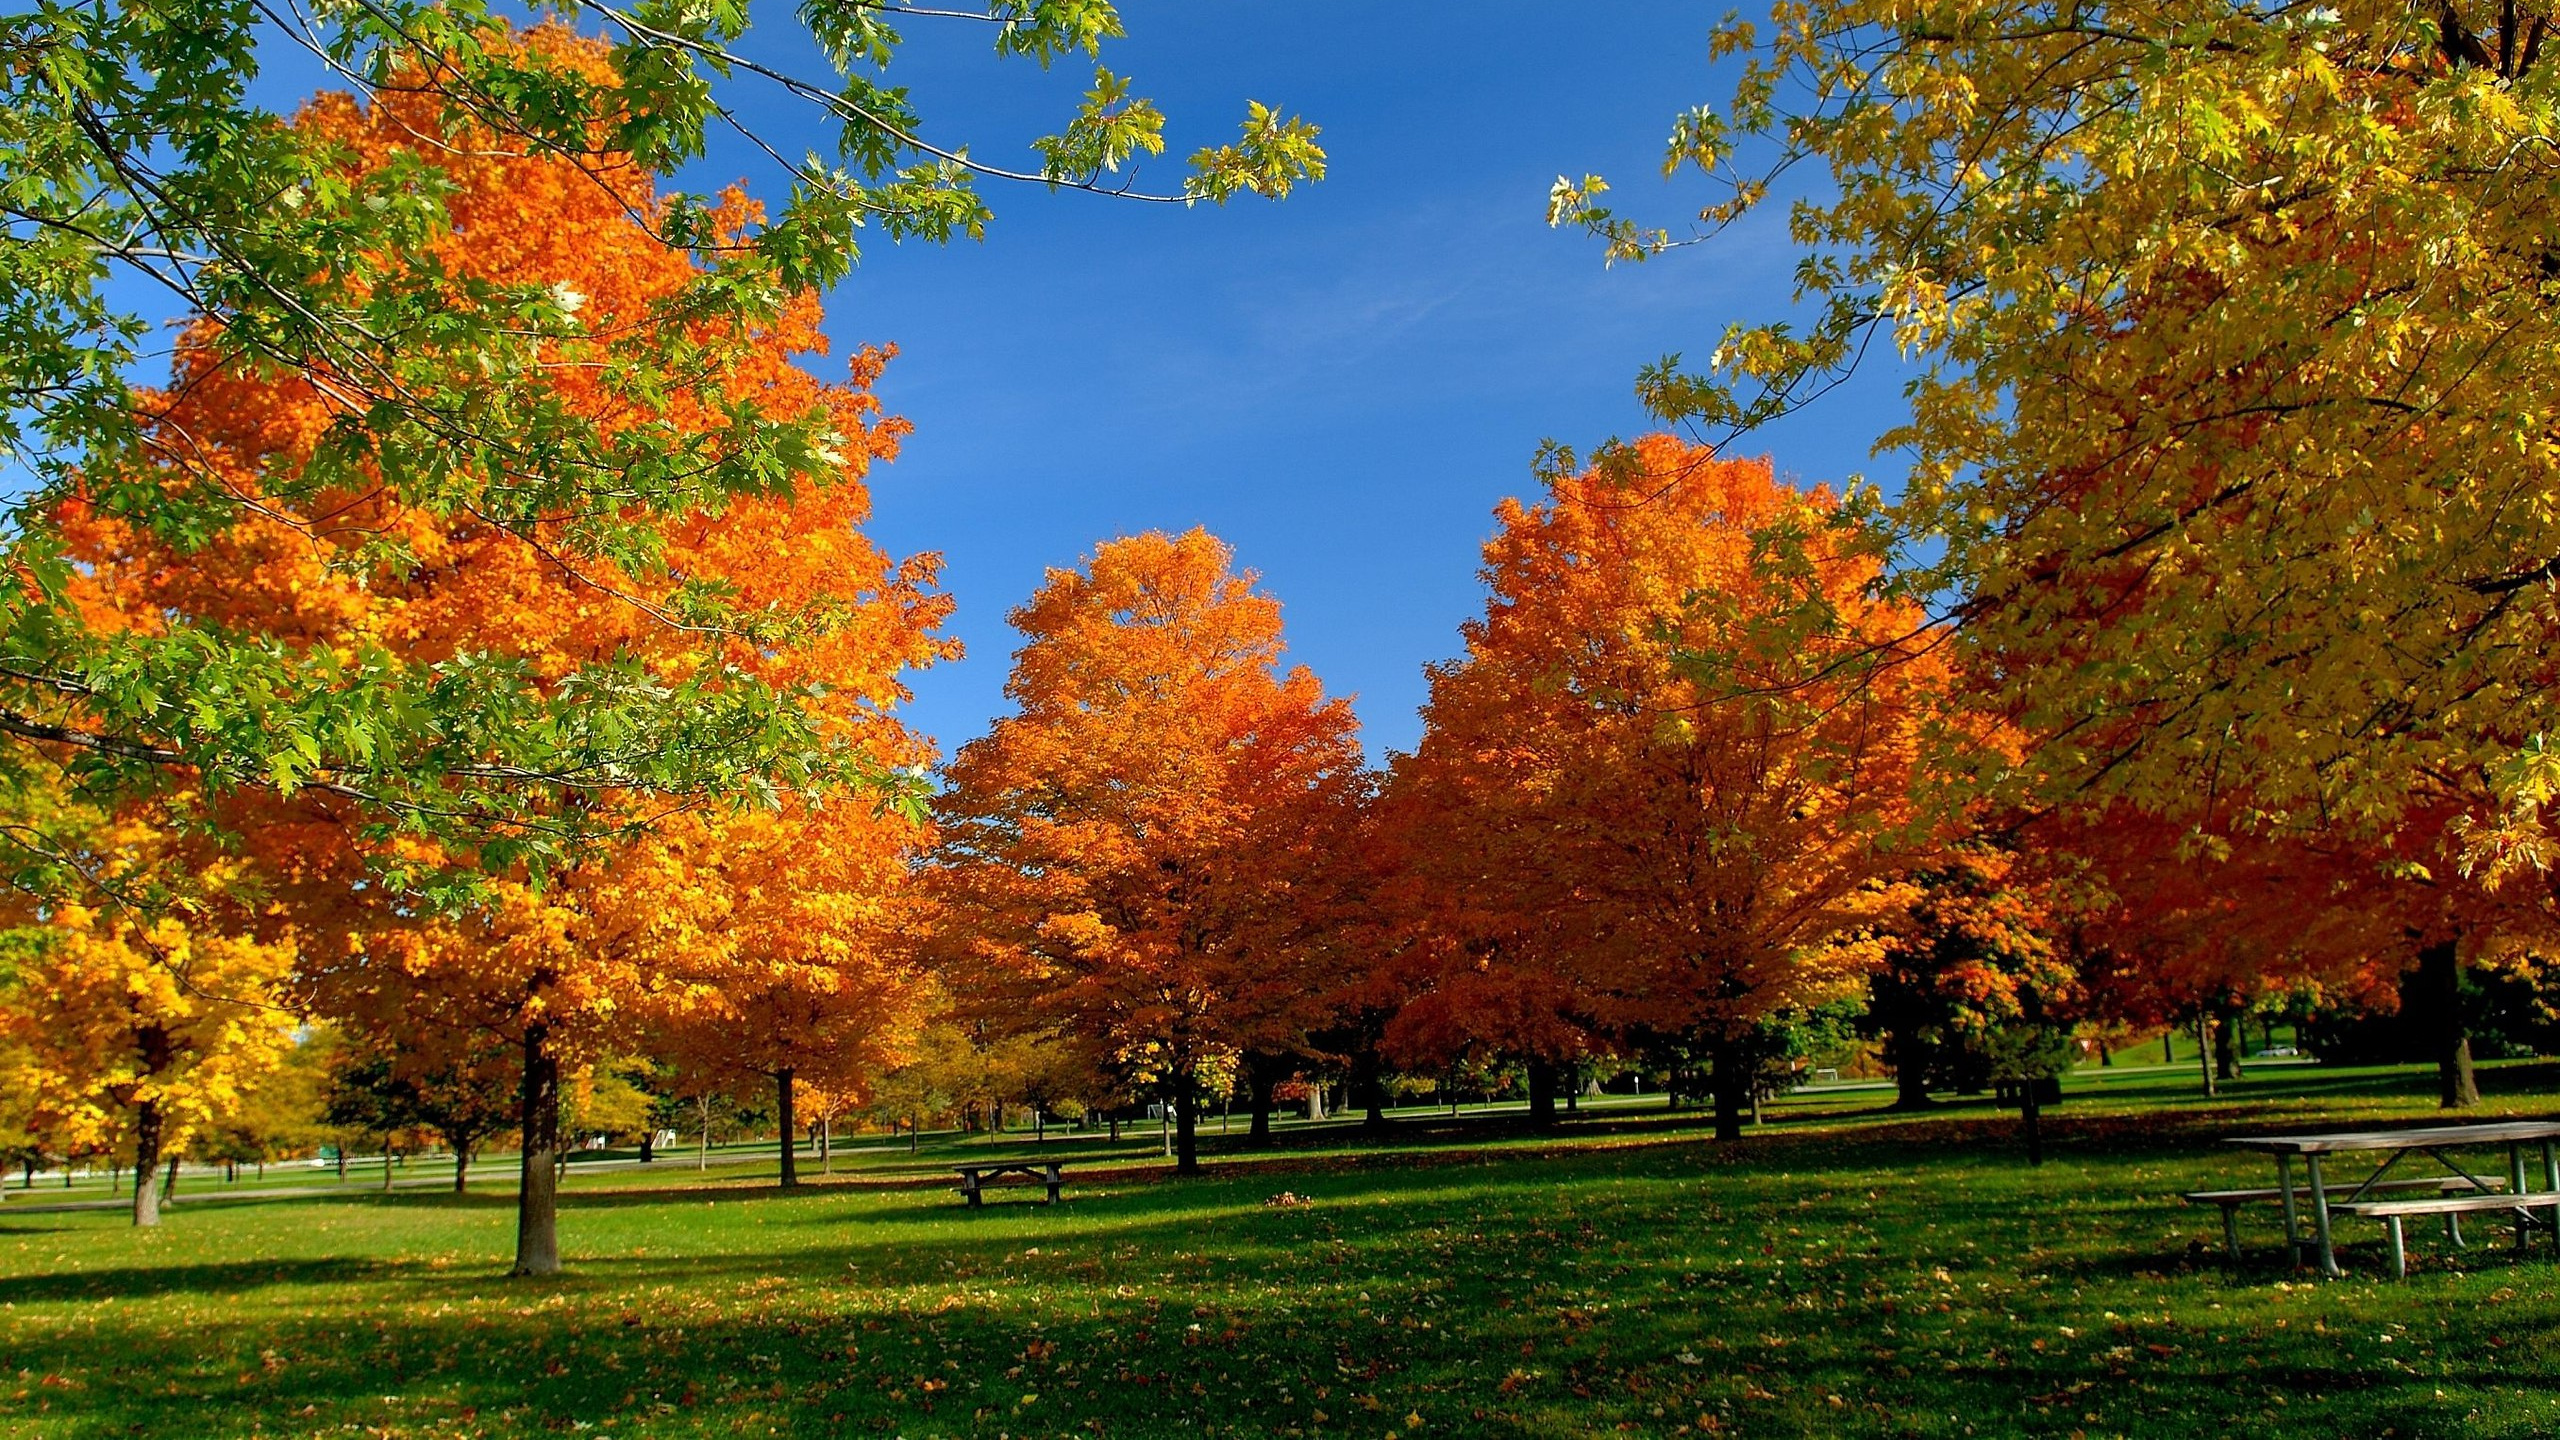 Orange and Yellow Leaf Trees on Green Grass Field Under Blue Sky During Daytime. Wallpaper in 2560x1440 Resolution